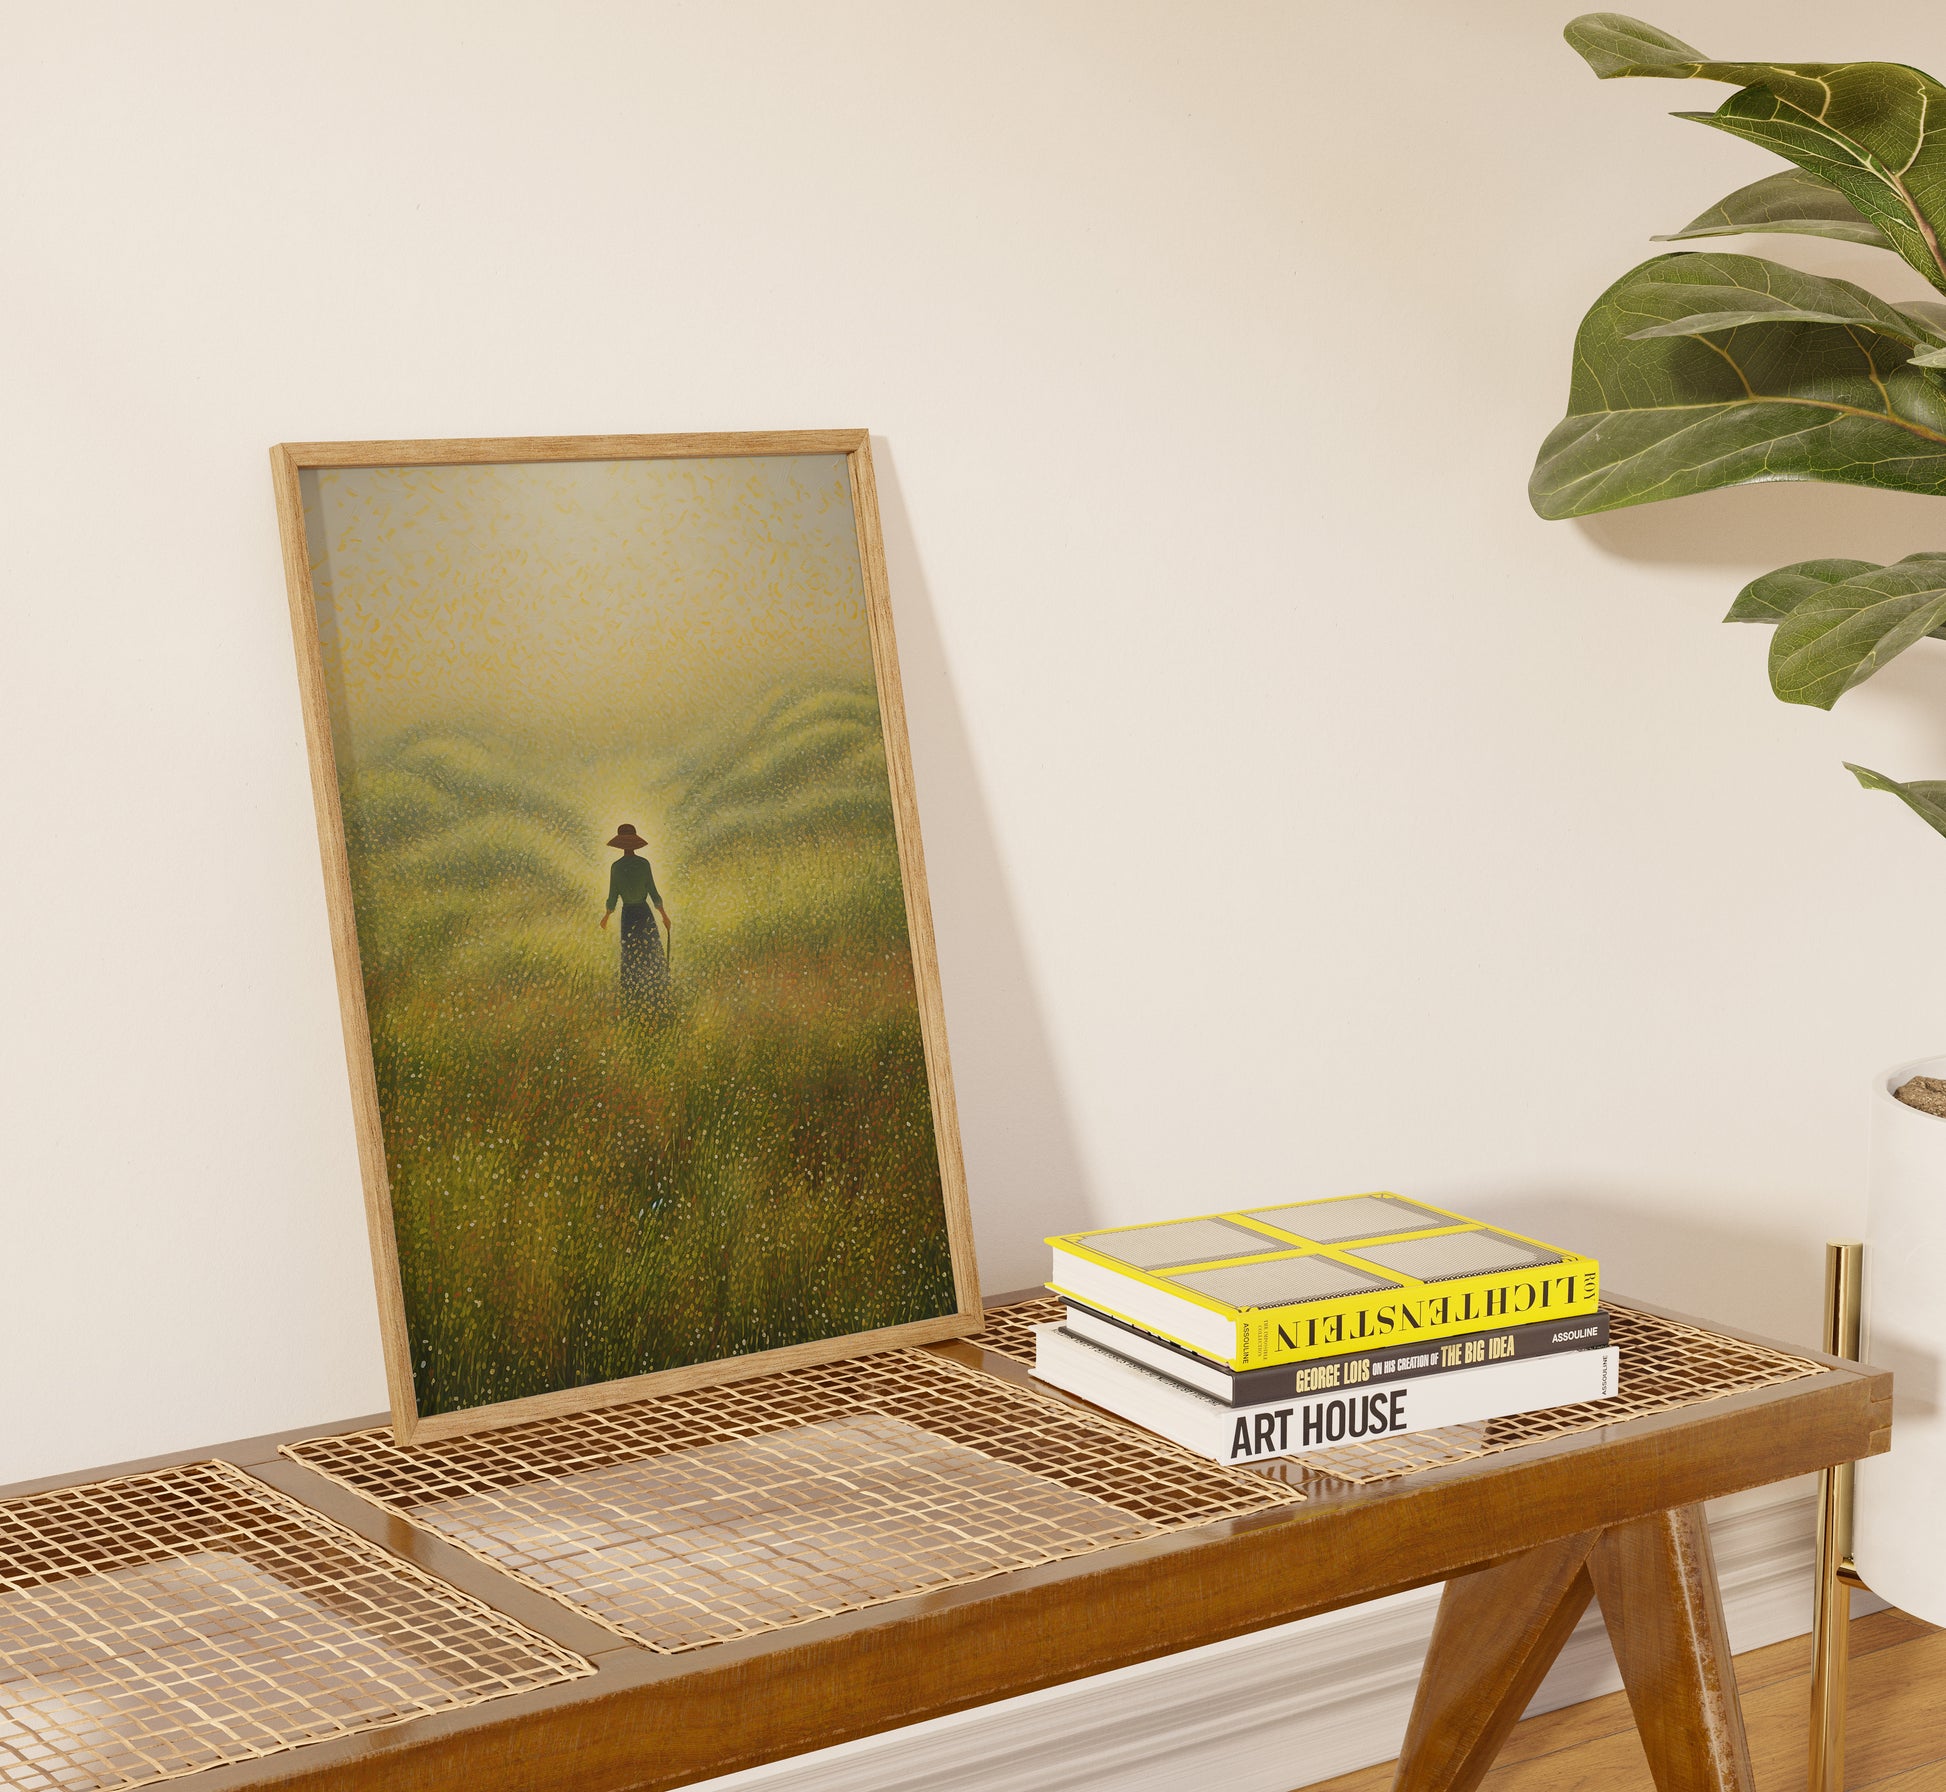 A framed painting of a figure in a field next to books on a woven table.